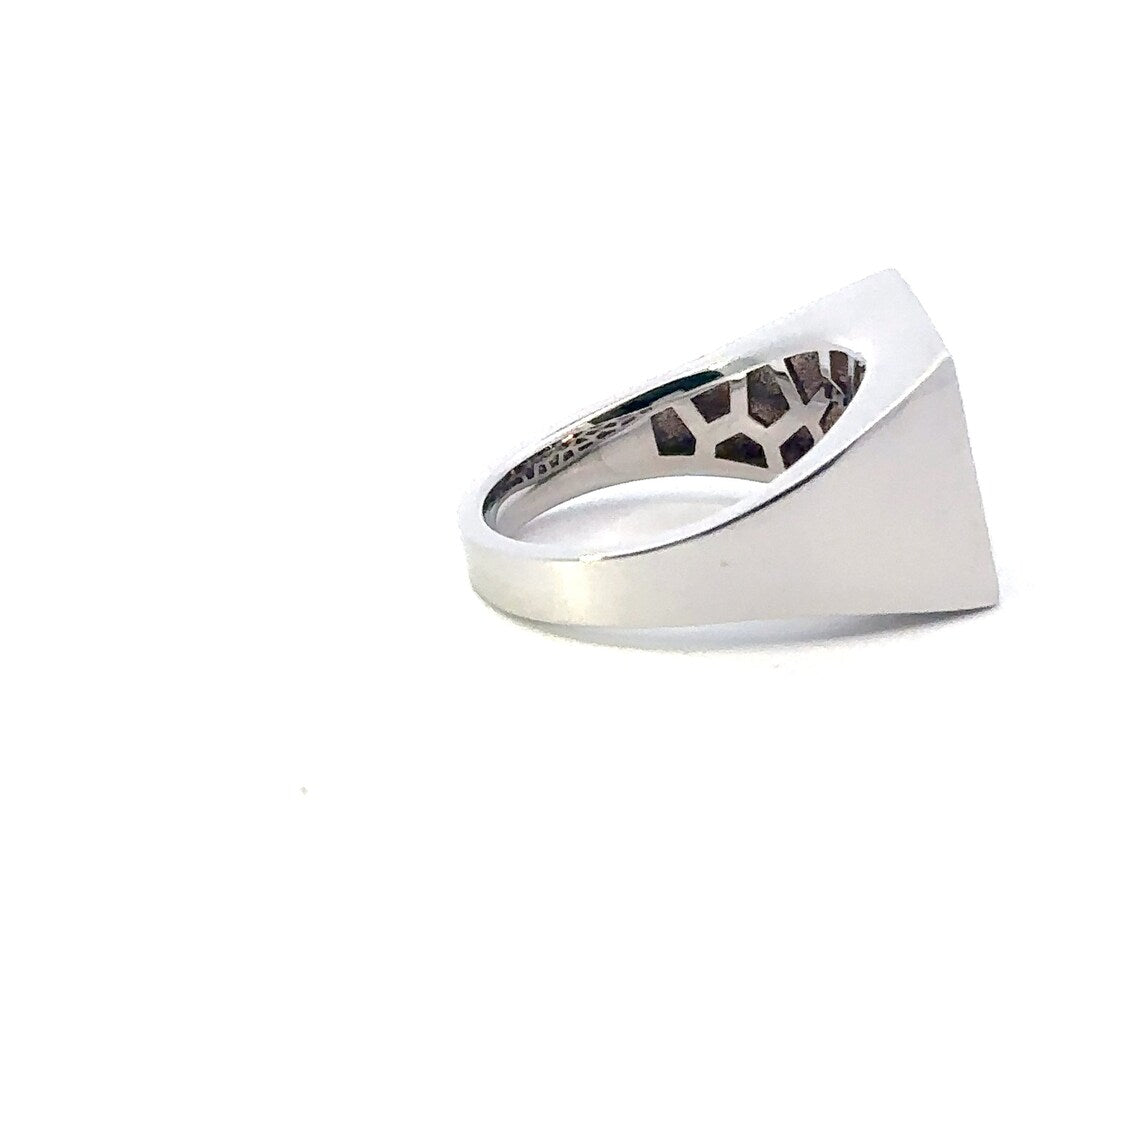 Rounded Rectangle Ring in 18K White Gold